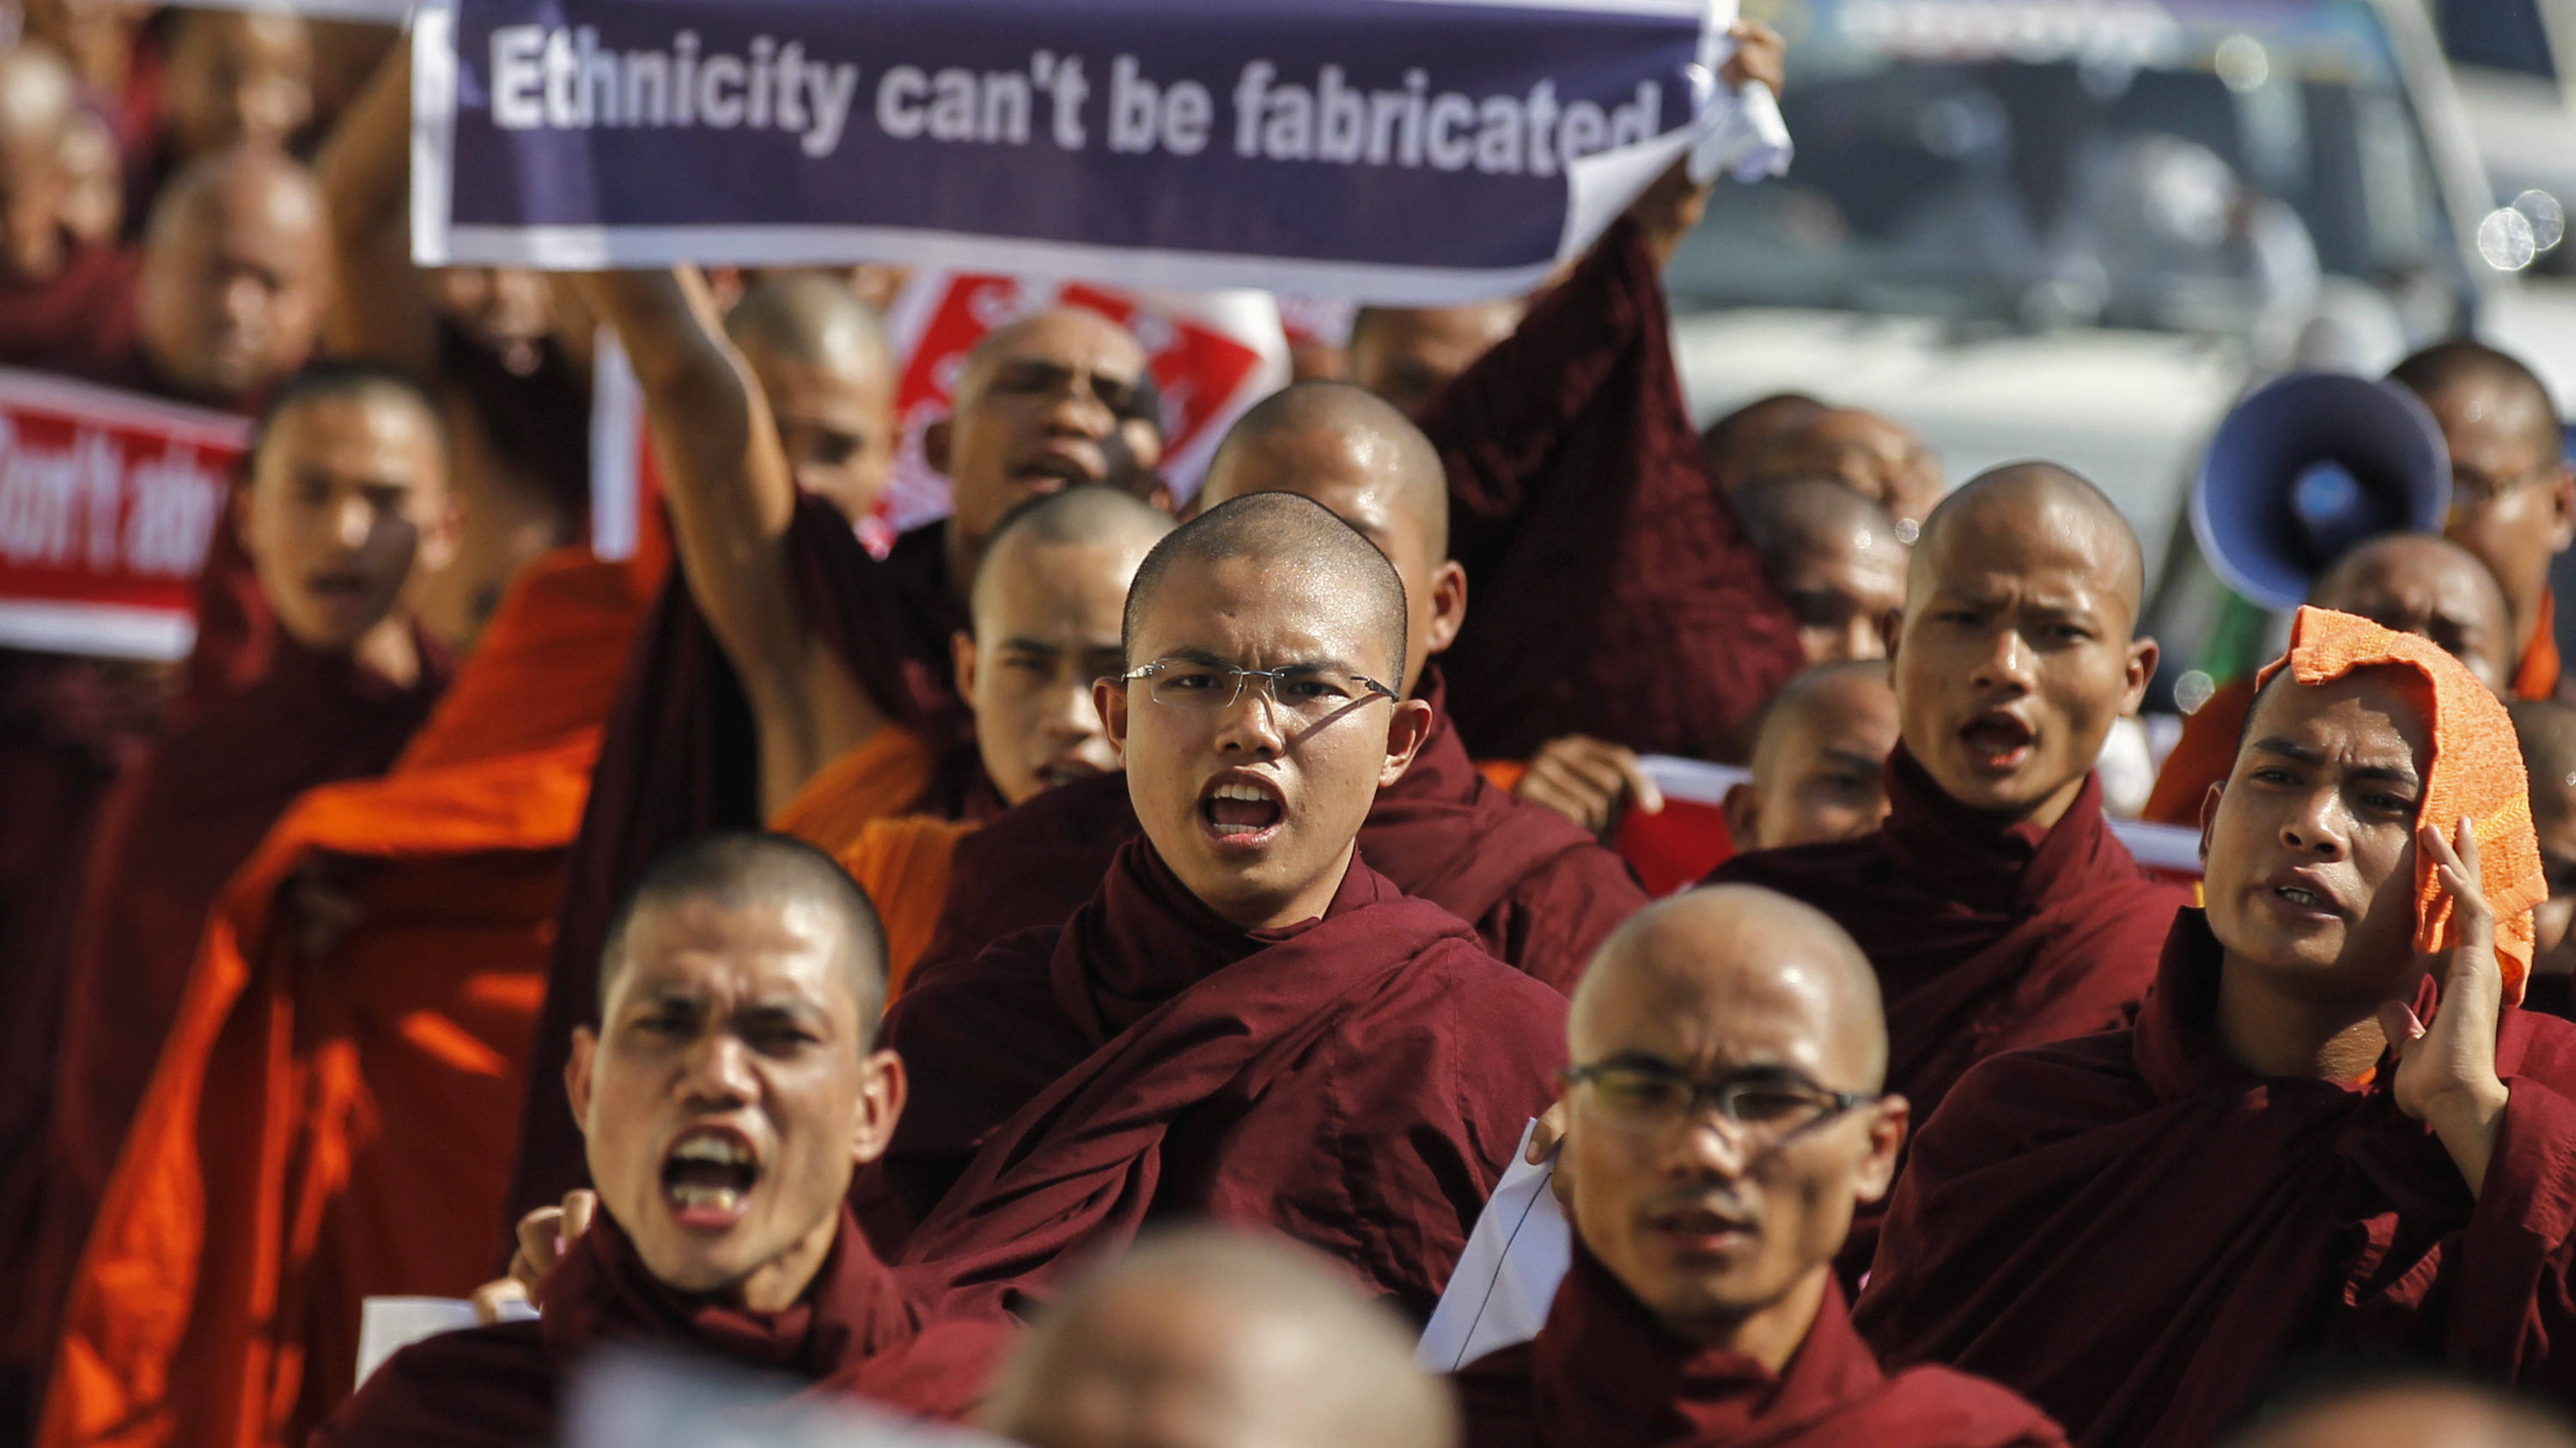 Buddhist monks protest the visit of a U.N. official in Yangon on Jan. 16, 2015. According to local media reports, they were angry that the international organization had urged the government to give members of the Rohingya minority citizenship. © Reuters